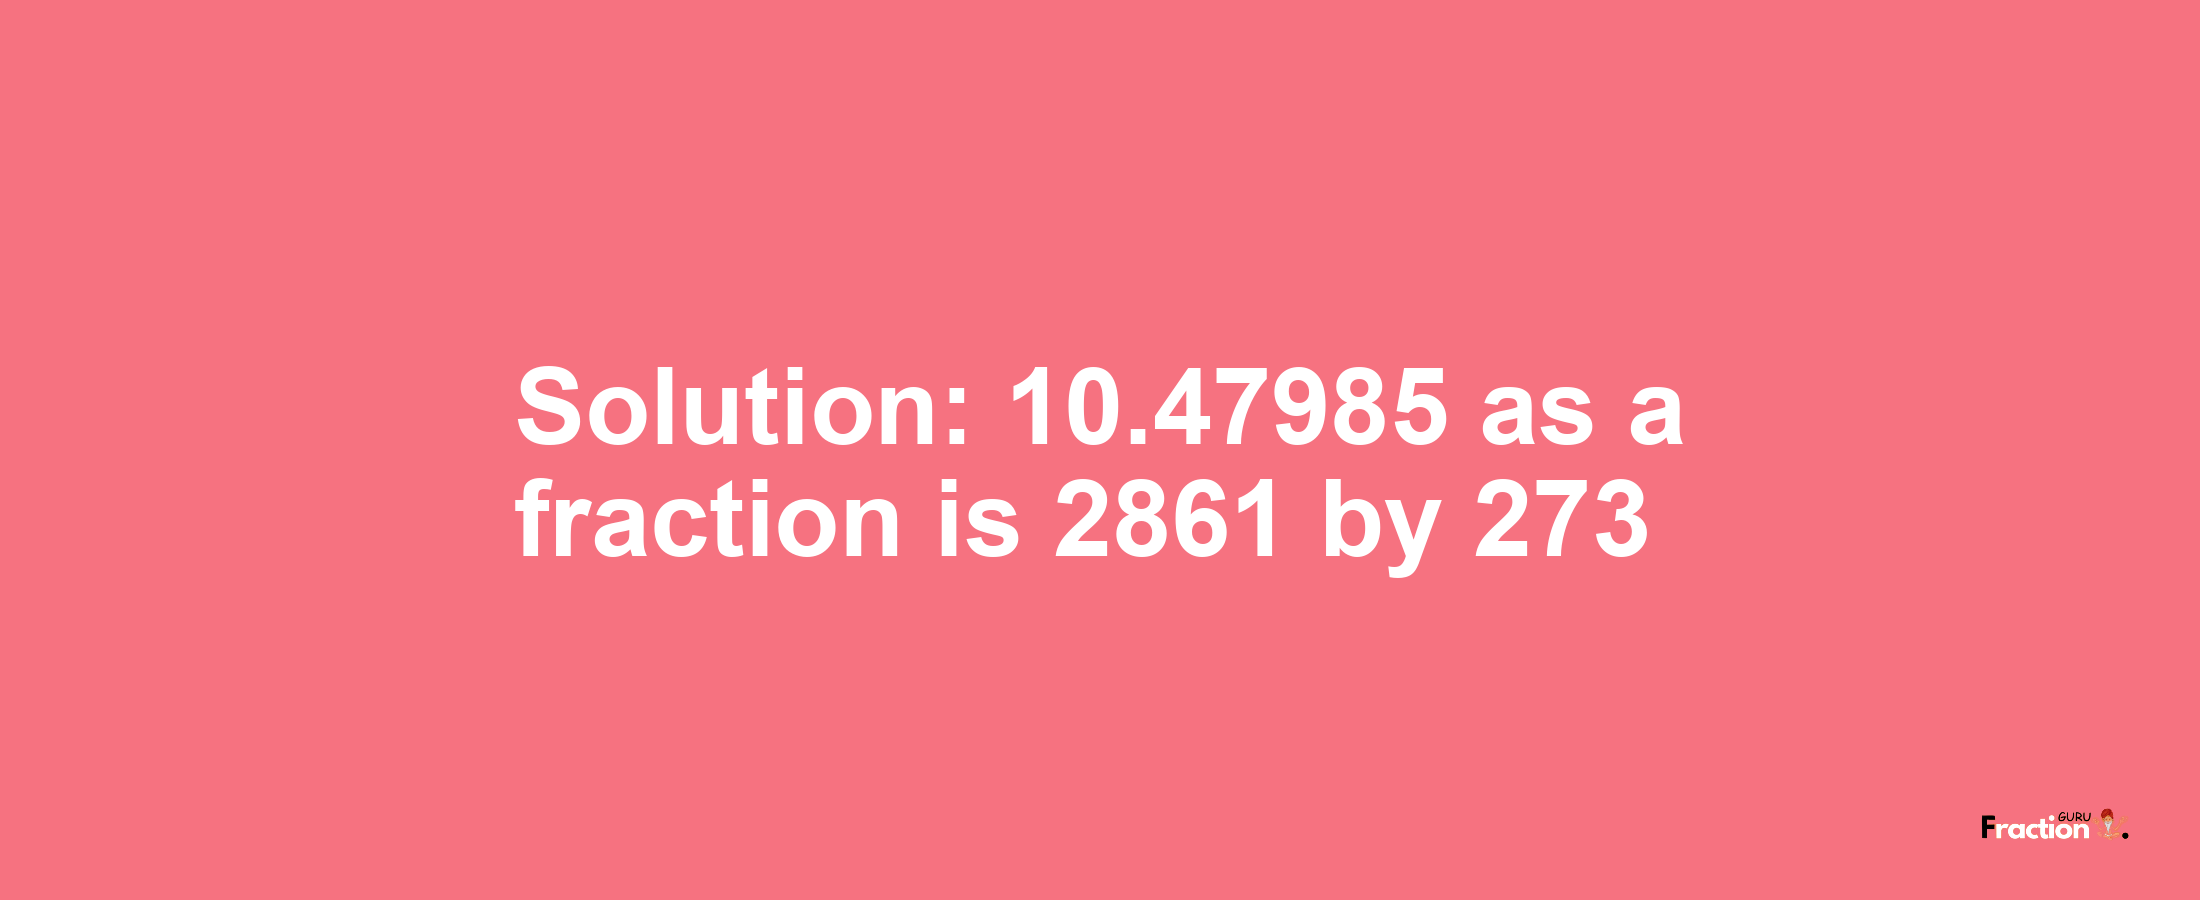 Solution:10.47985 as a fraction is 2861/273